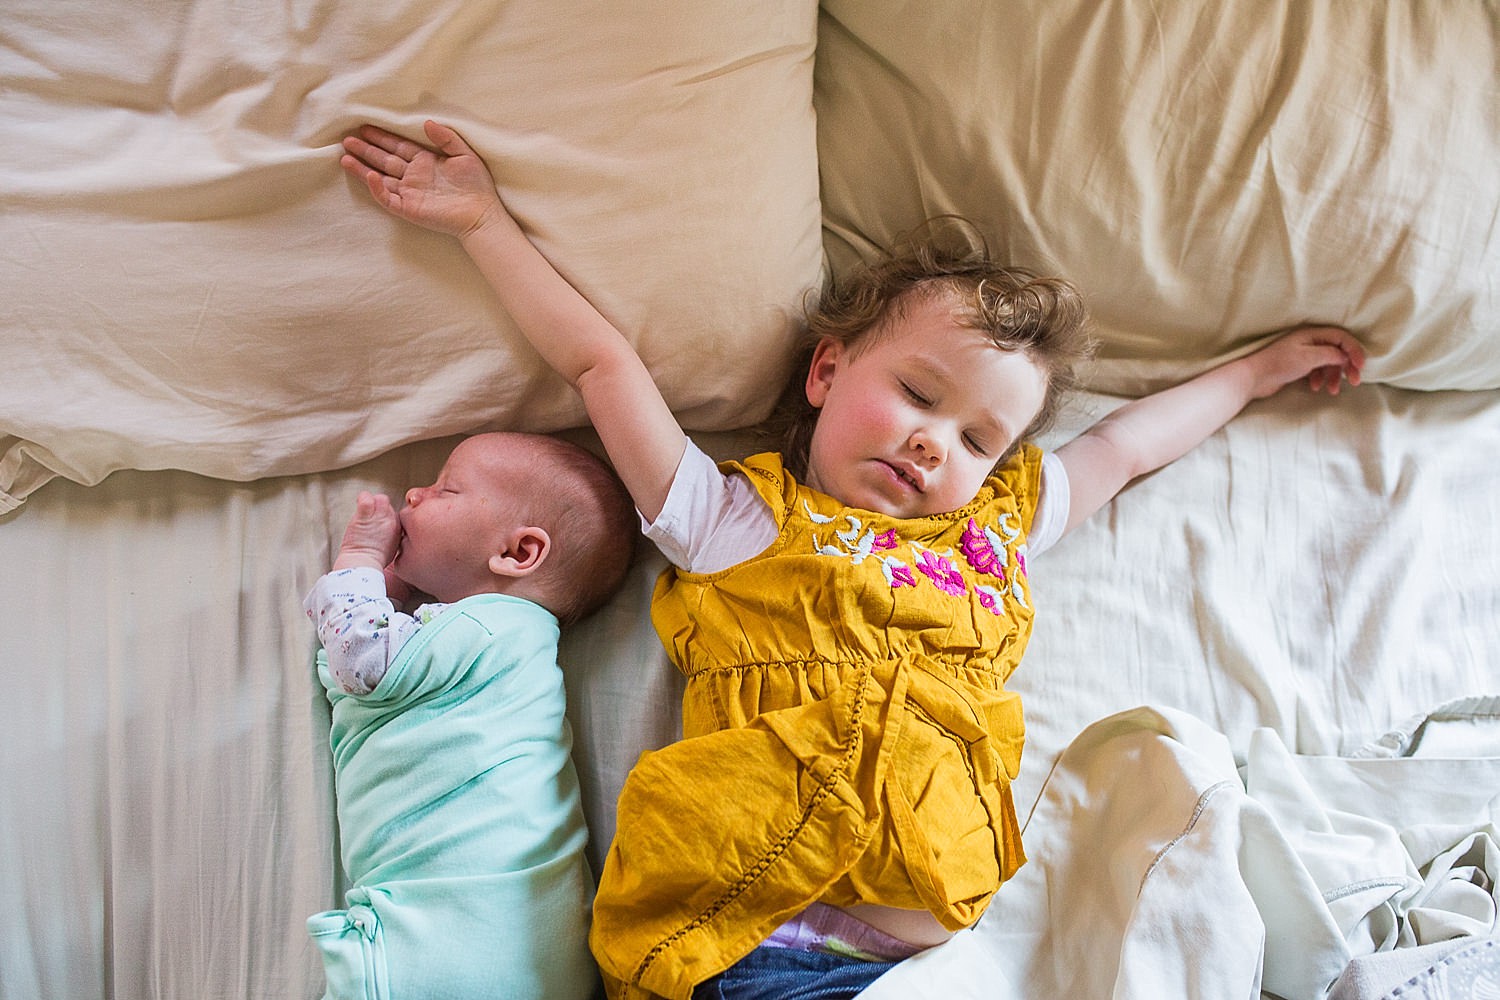  Photo of a newborn baby and his toddler big sister napping together in bed. 